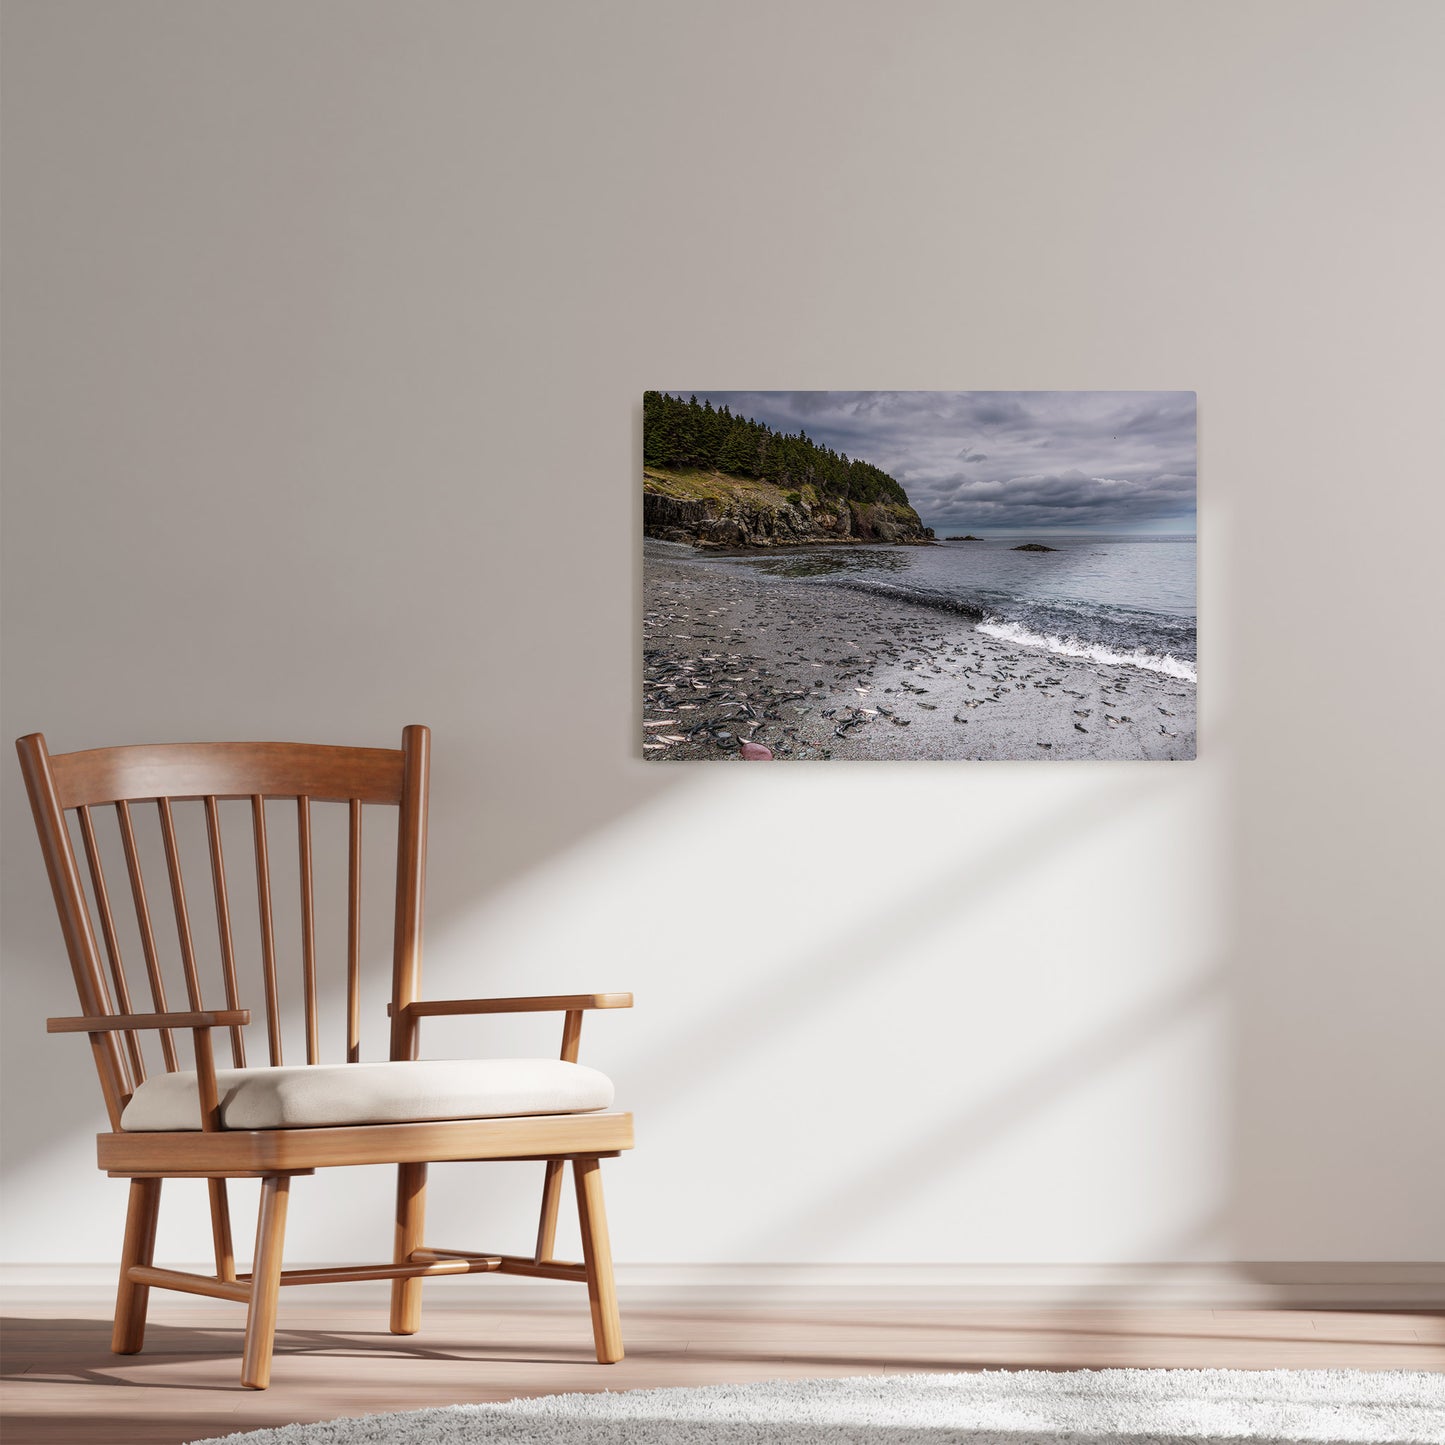 Ray Mackey's Caplin Roll photography reproduced on HD metal print and displayed on wall